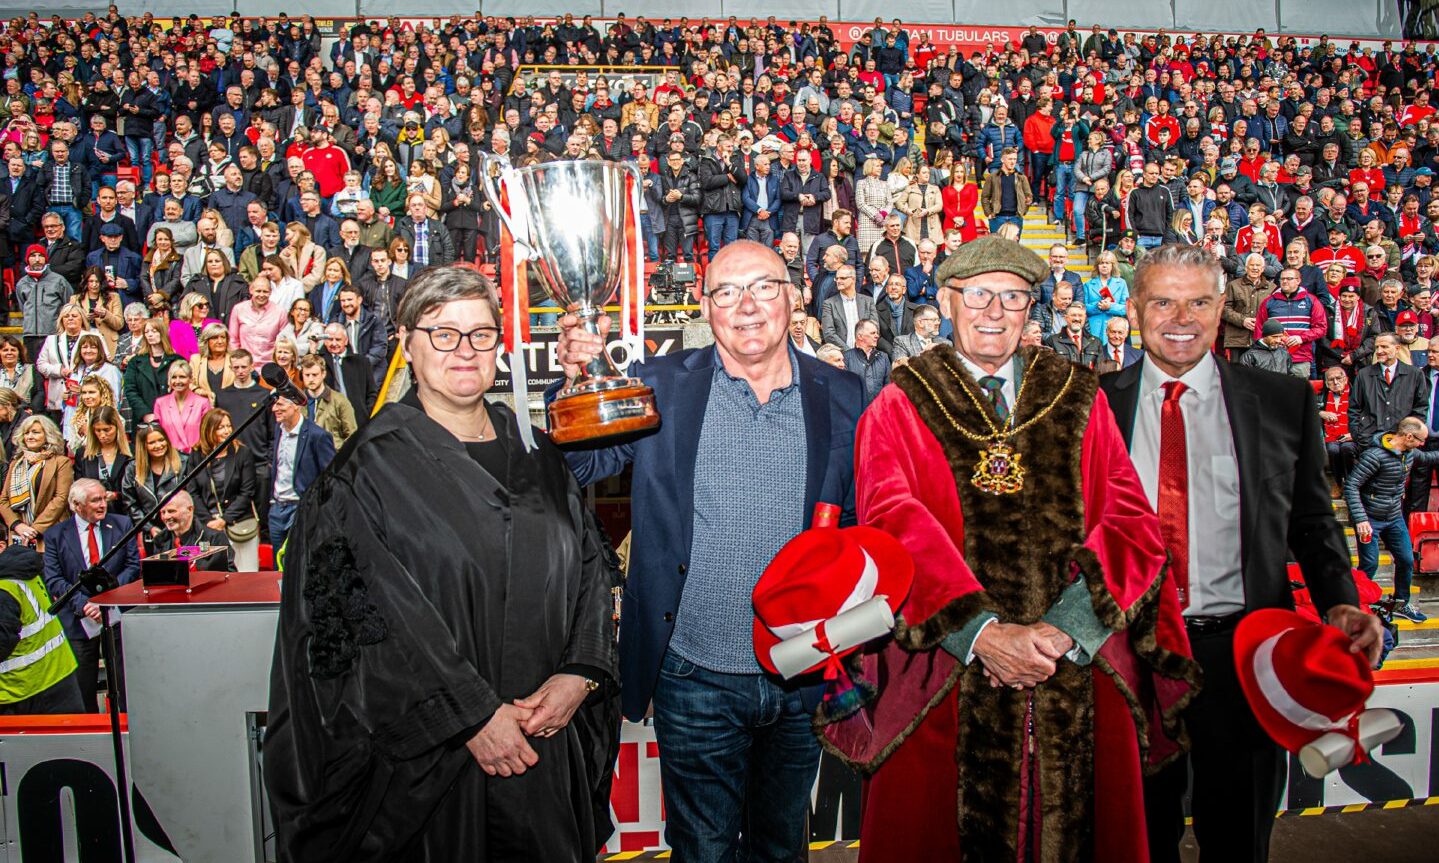 The Gothenburg Greats Freedom of the City celebratory event in May. Pictured are council chief executive Angela Scott, Willie Miller, Lord Provost David Cameron and Dave Cormack.